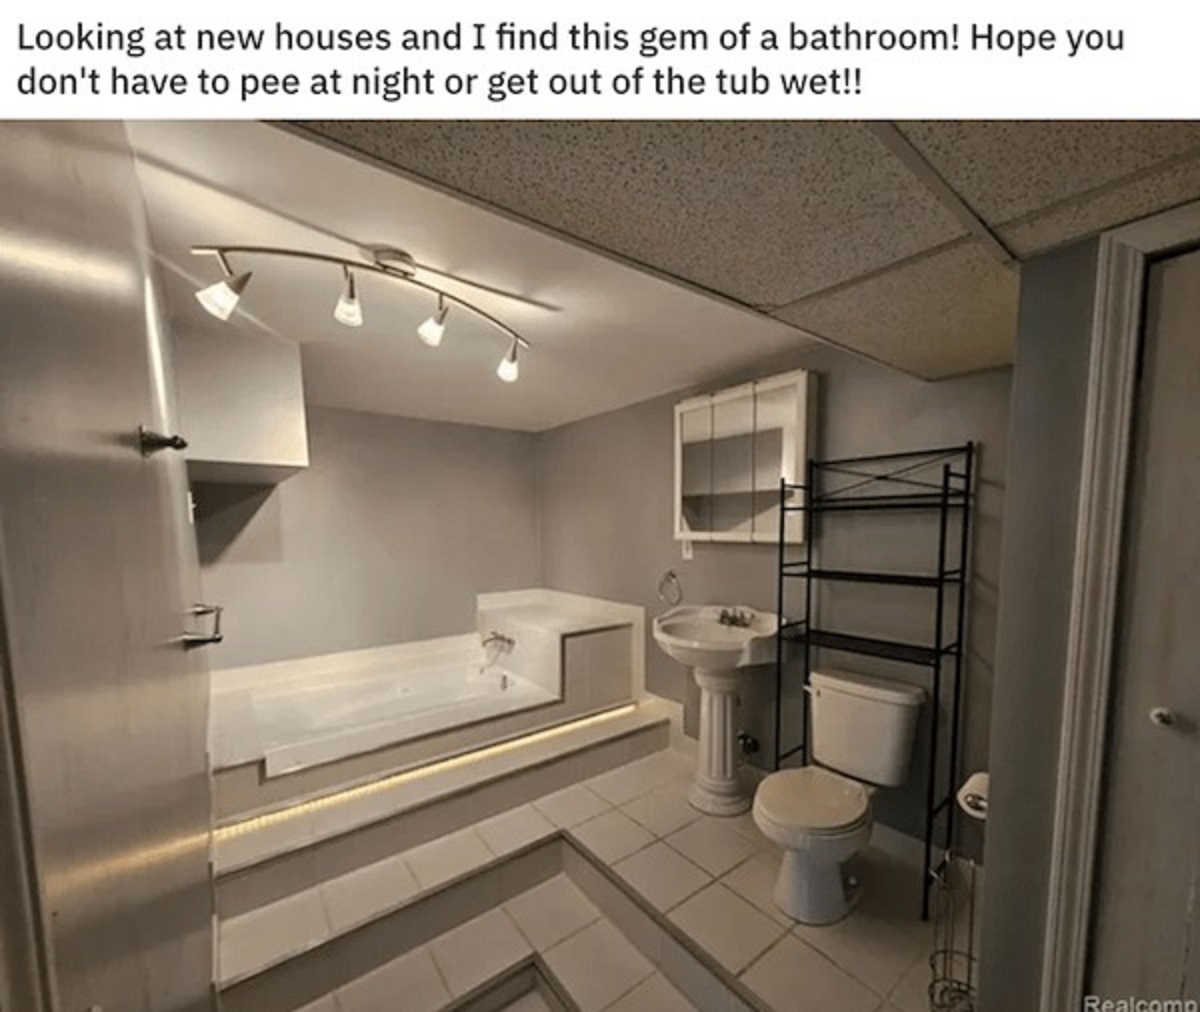 interior design - Looking at new houses and I find this gem of a bathroom! Hope you don't have to pee at night or get out of the tub wet!! Realcomp